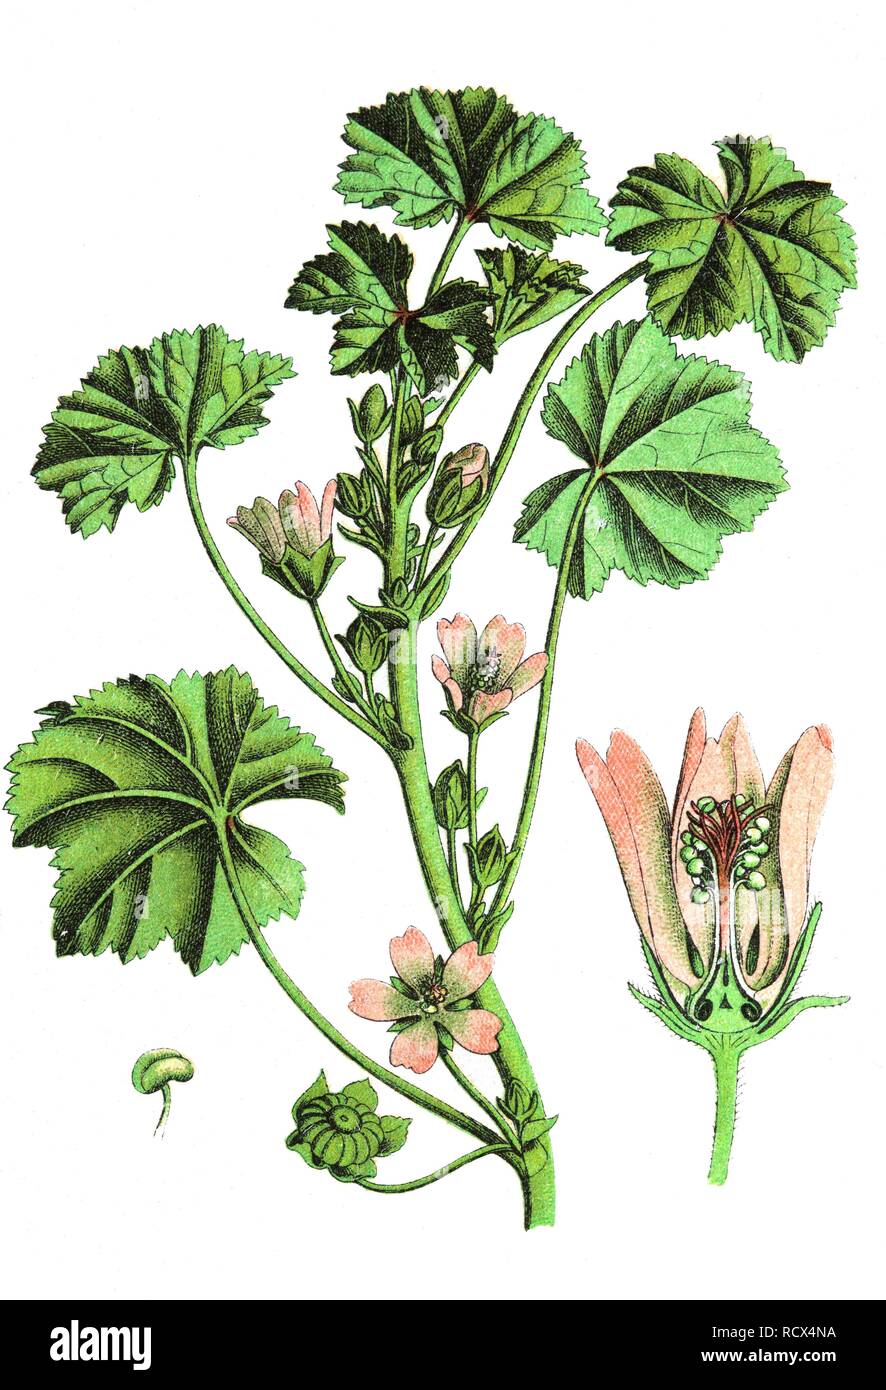 Common mallow, buttonweed, cheeseplant (Malva neglecta), medicinal and useful plants, chromolithography, 1880 Stock Photo